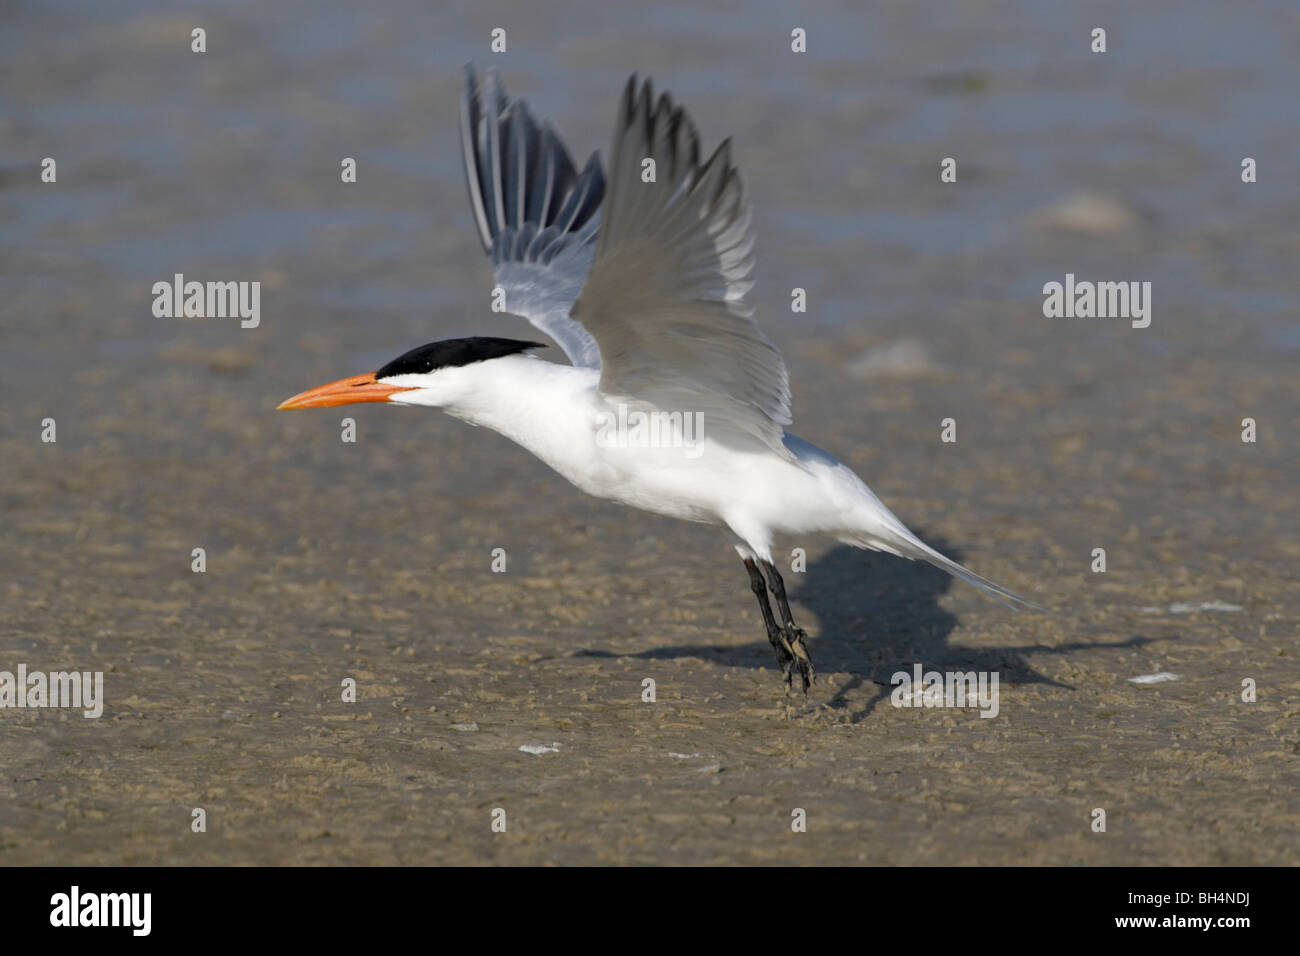 Royal tern (Sterna maxima) taking off from beach at Fort de Soto. Stock Photo